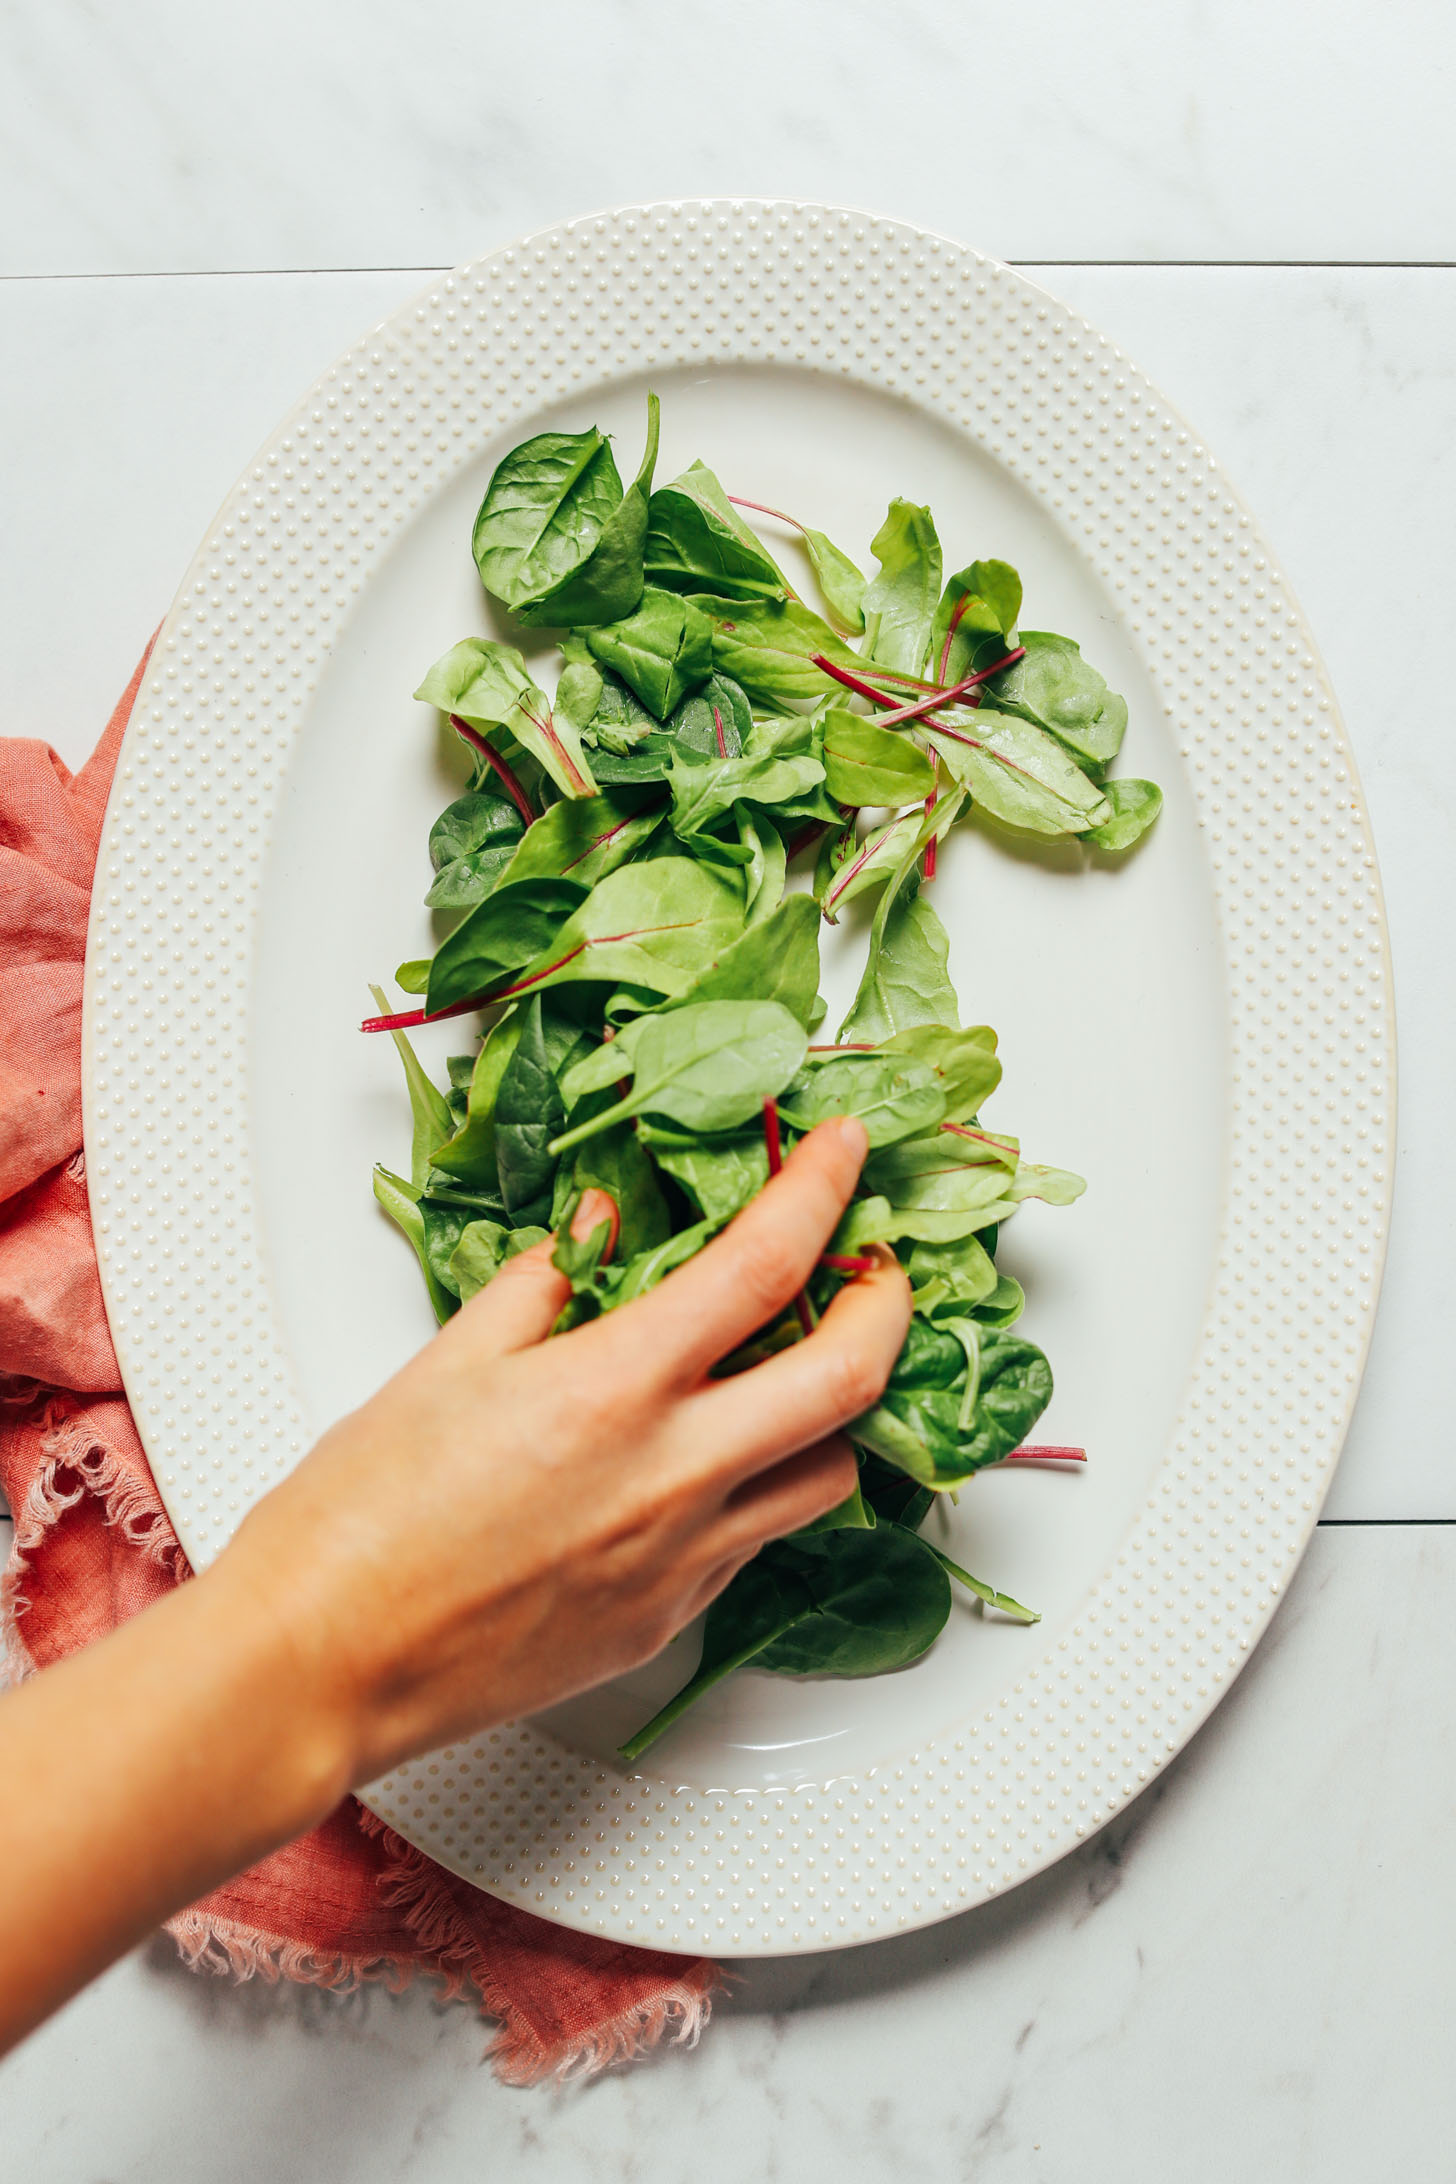 Overhead image of a white platter pink towel and greens being placed on the plate by hand